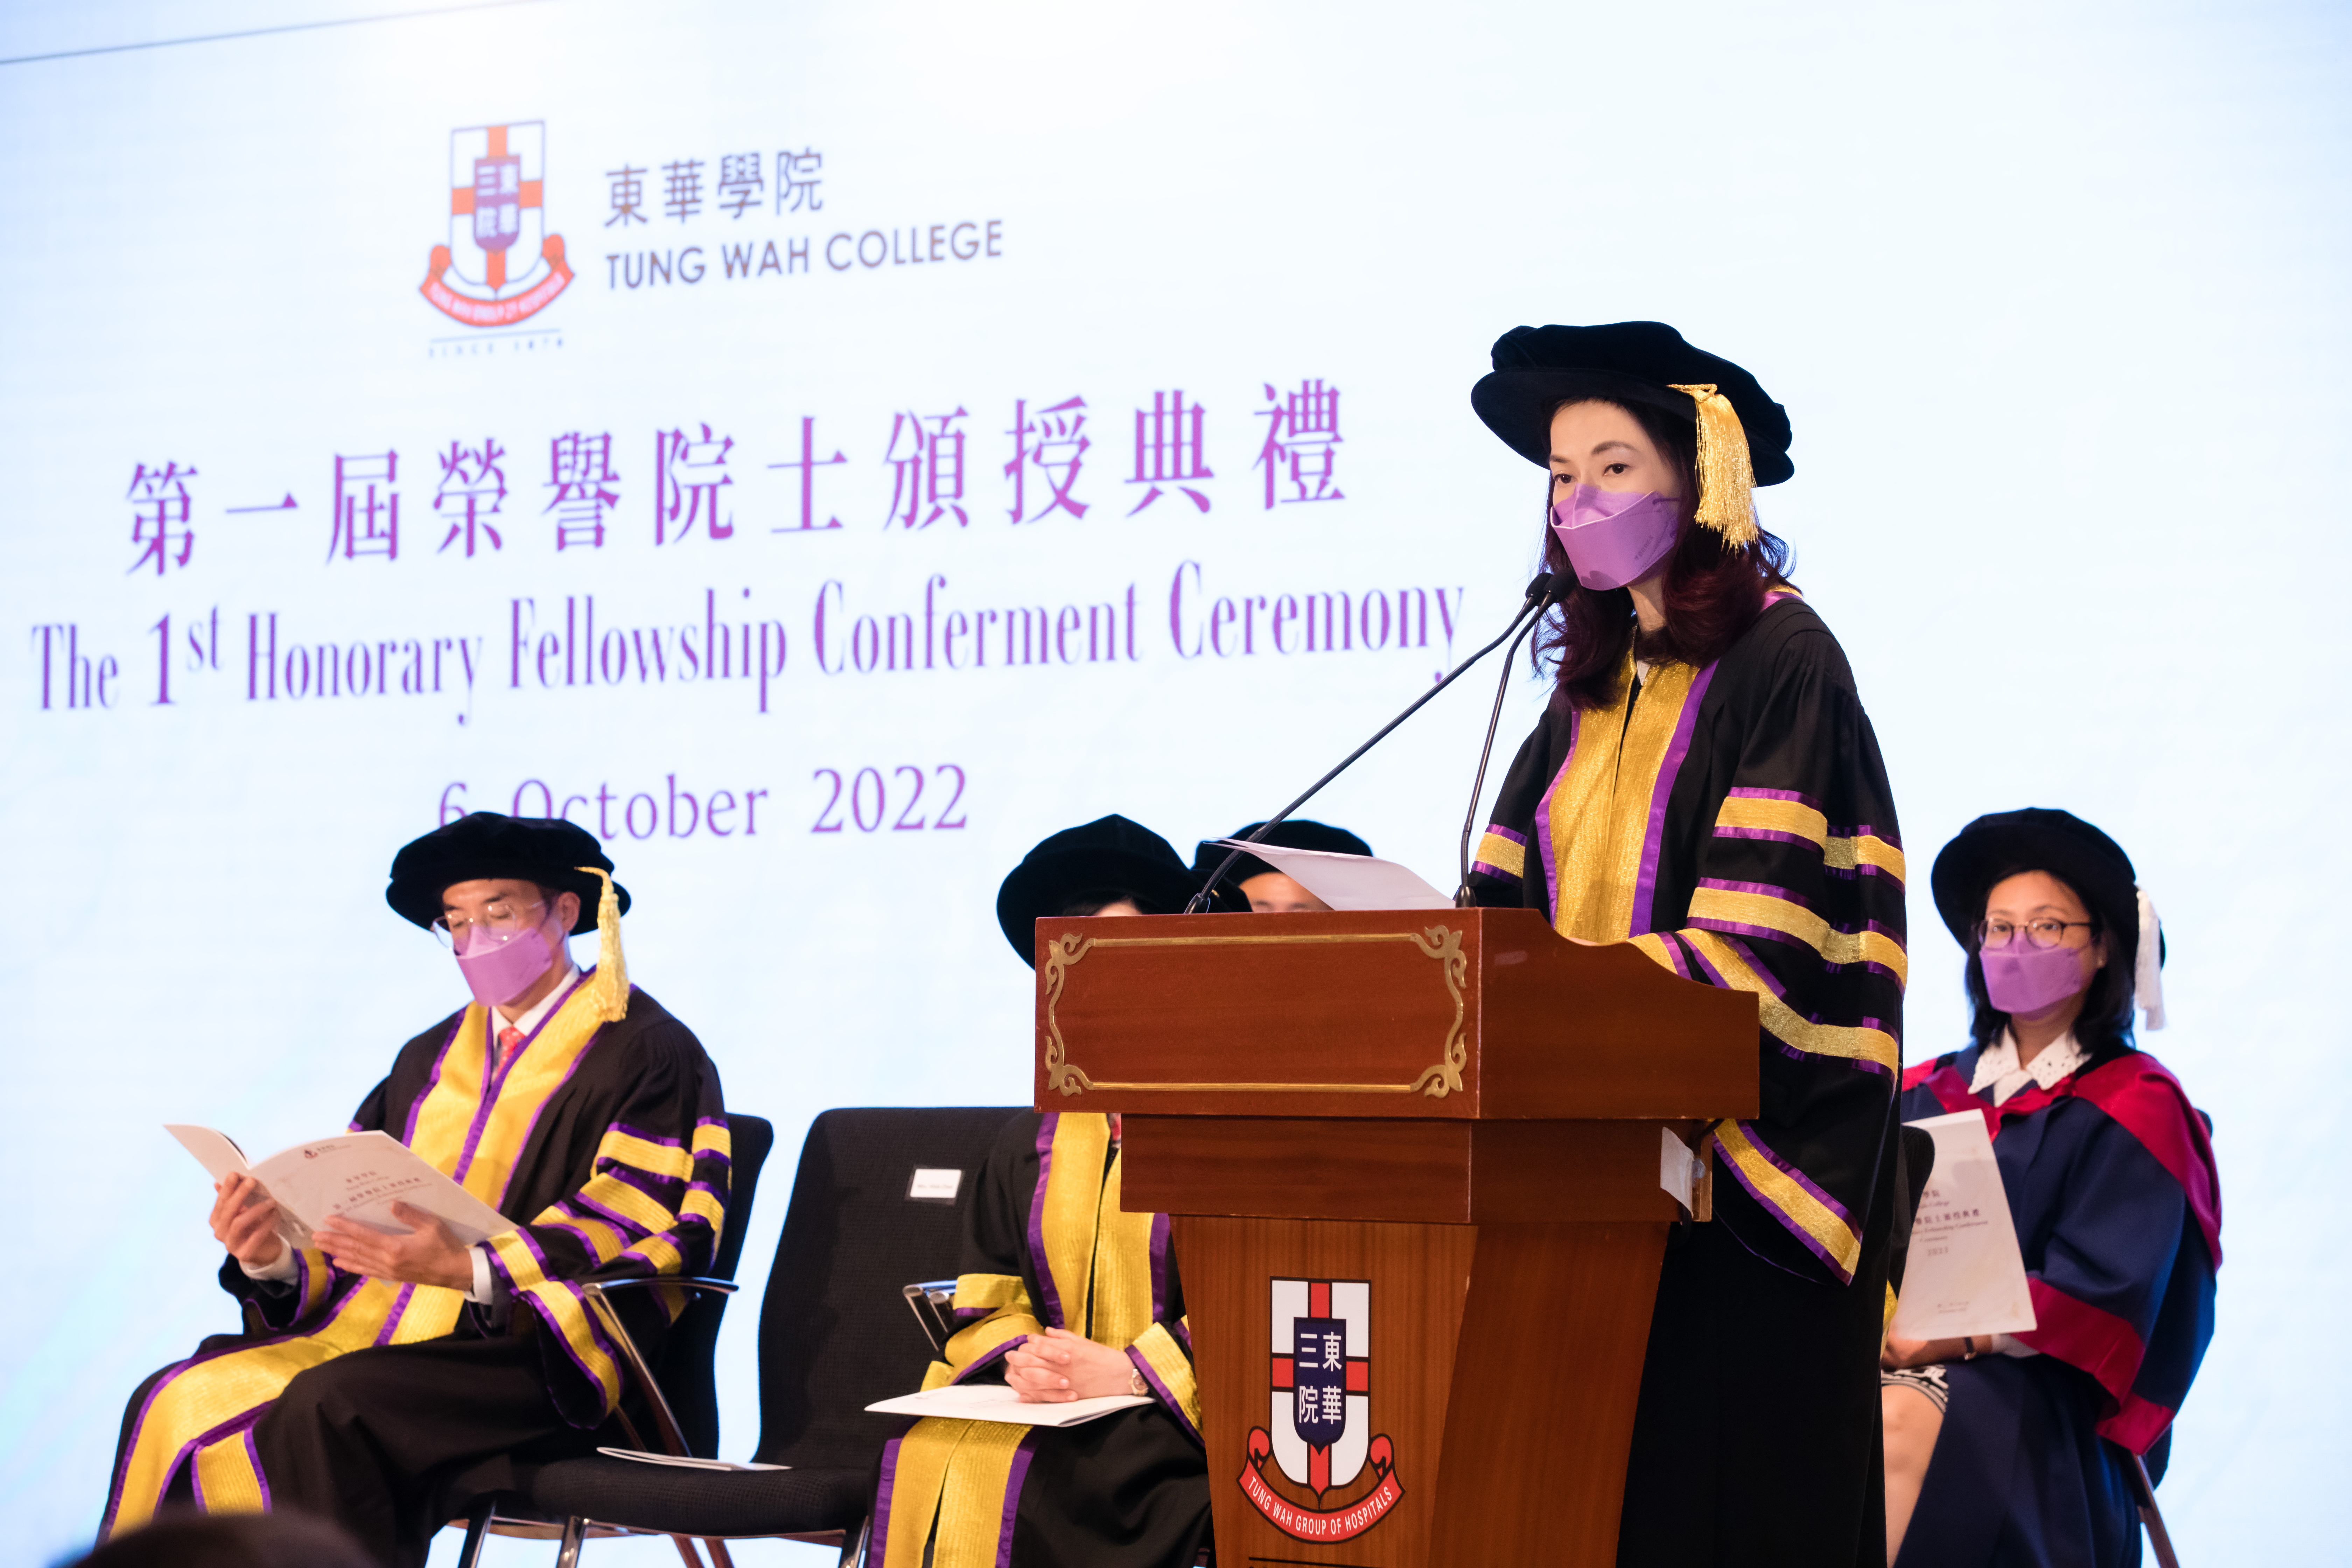 Mrs. Viola Chan Man Yee-Wai, Chairperson of College Council, delivers speech for the Ceremony.